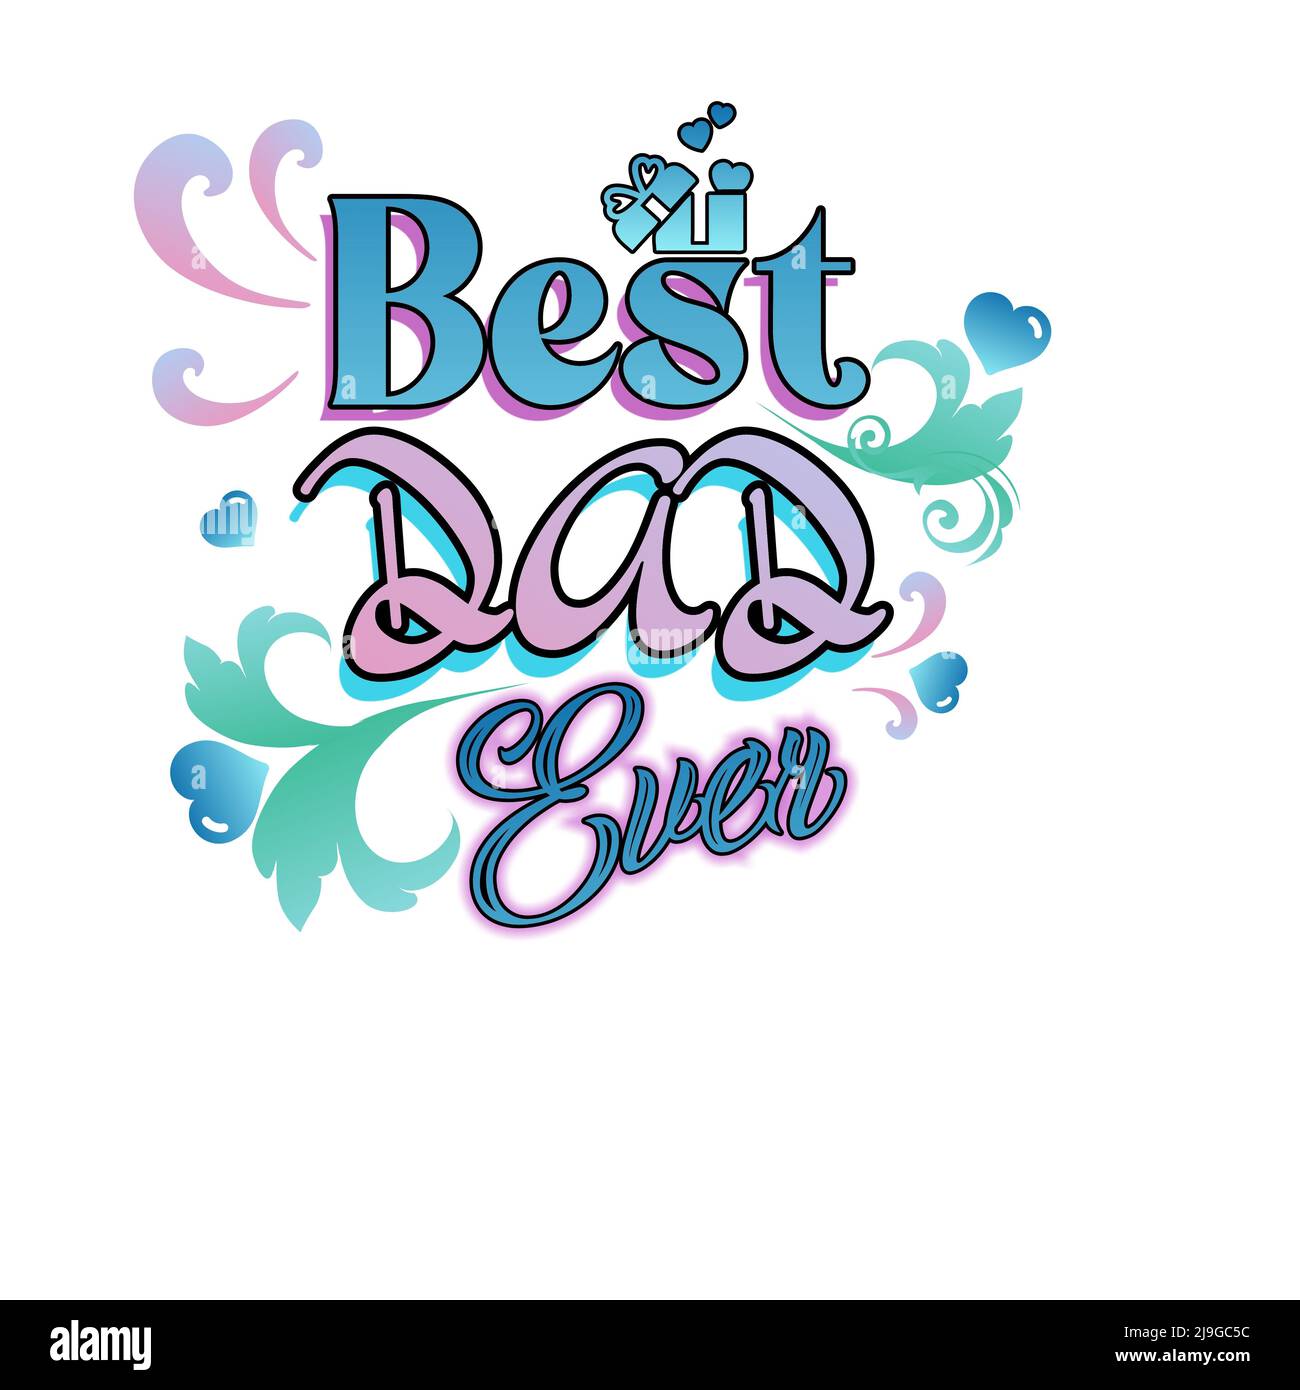 Best DAD ever, postcard for fathers day, designed with beautiful calligraphy illustration isolated on a white template. Stock Photo